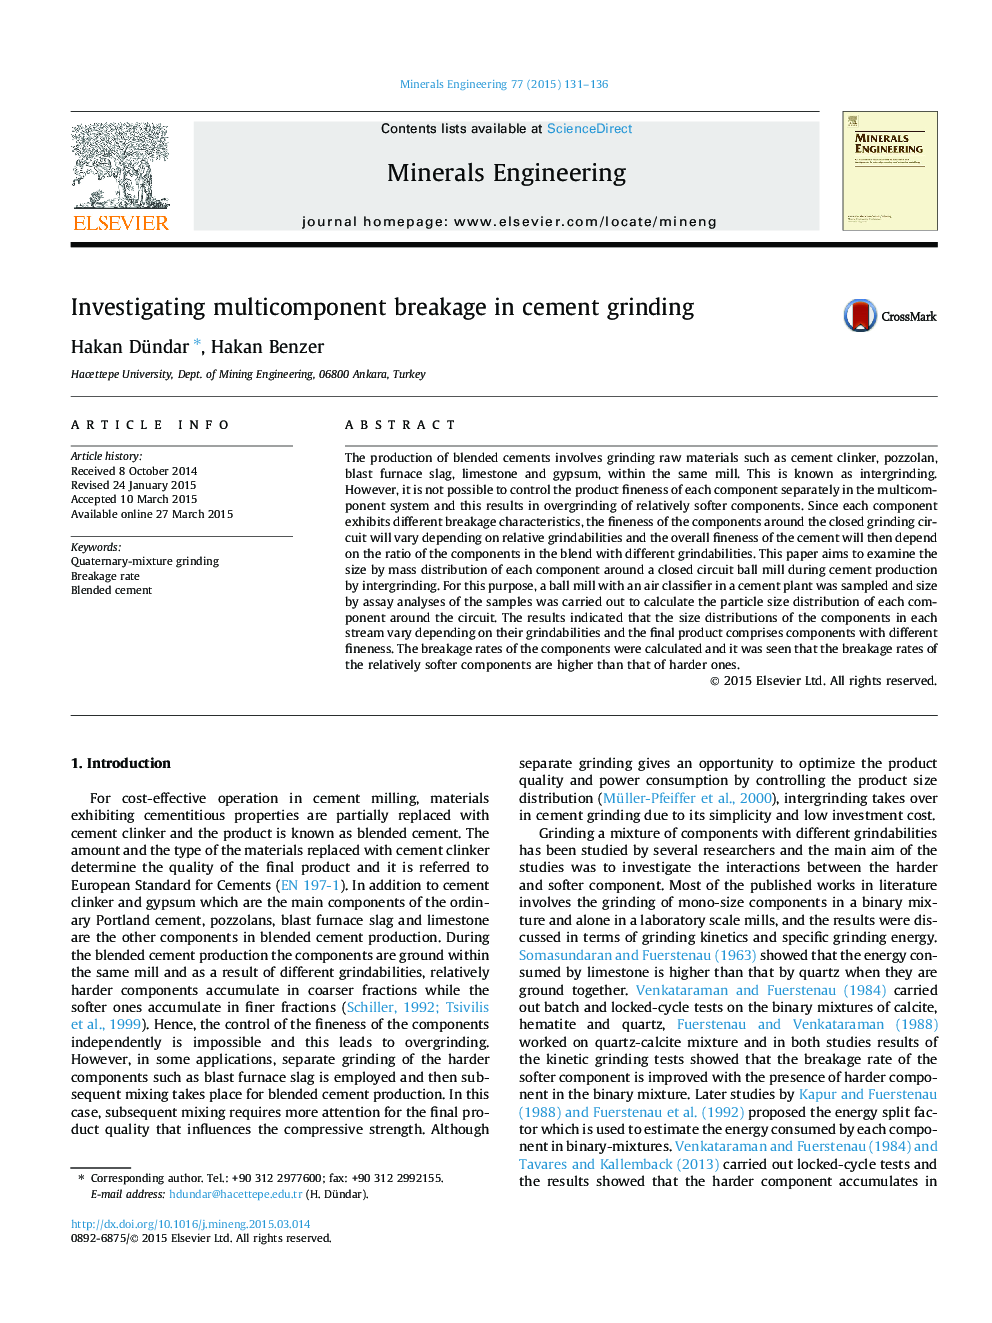 Investigating multicomponent breakage in cement grinding